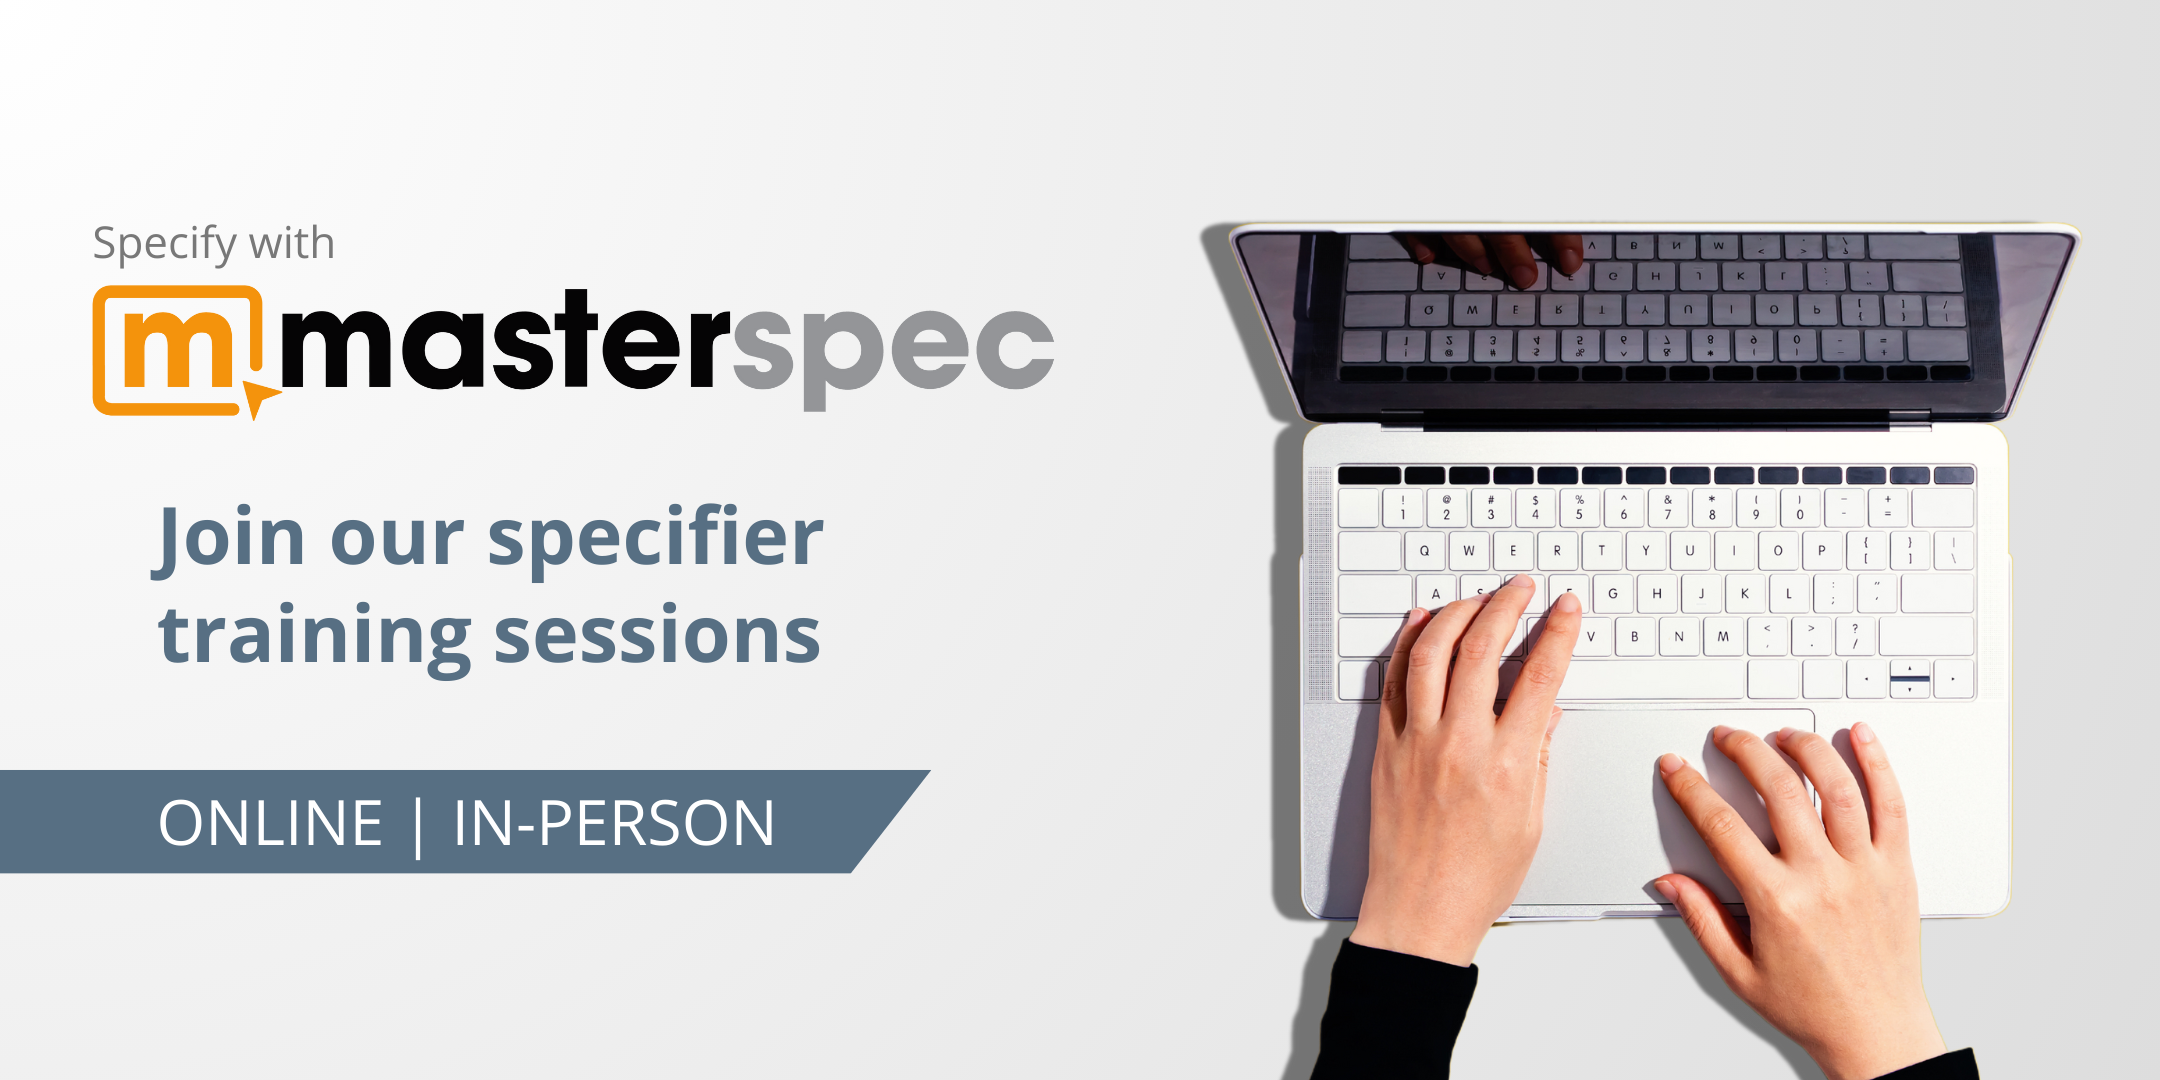 Specify with Masterspec